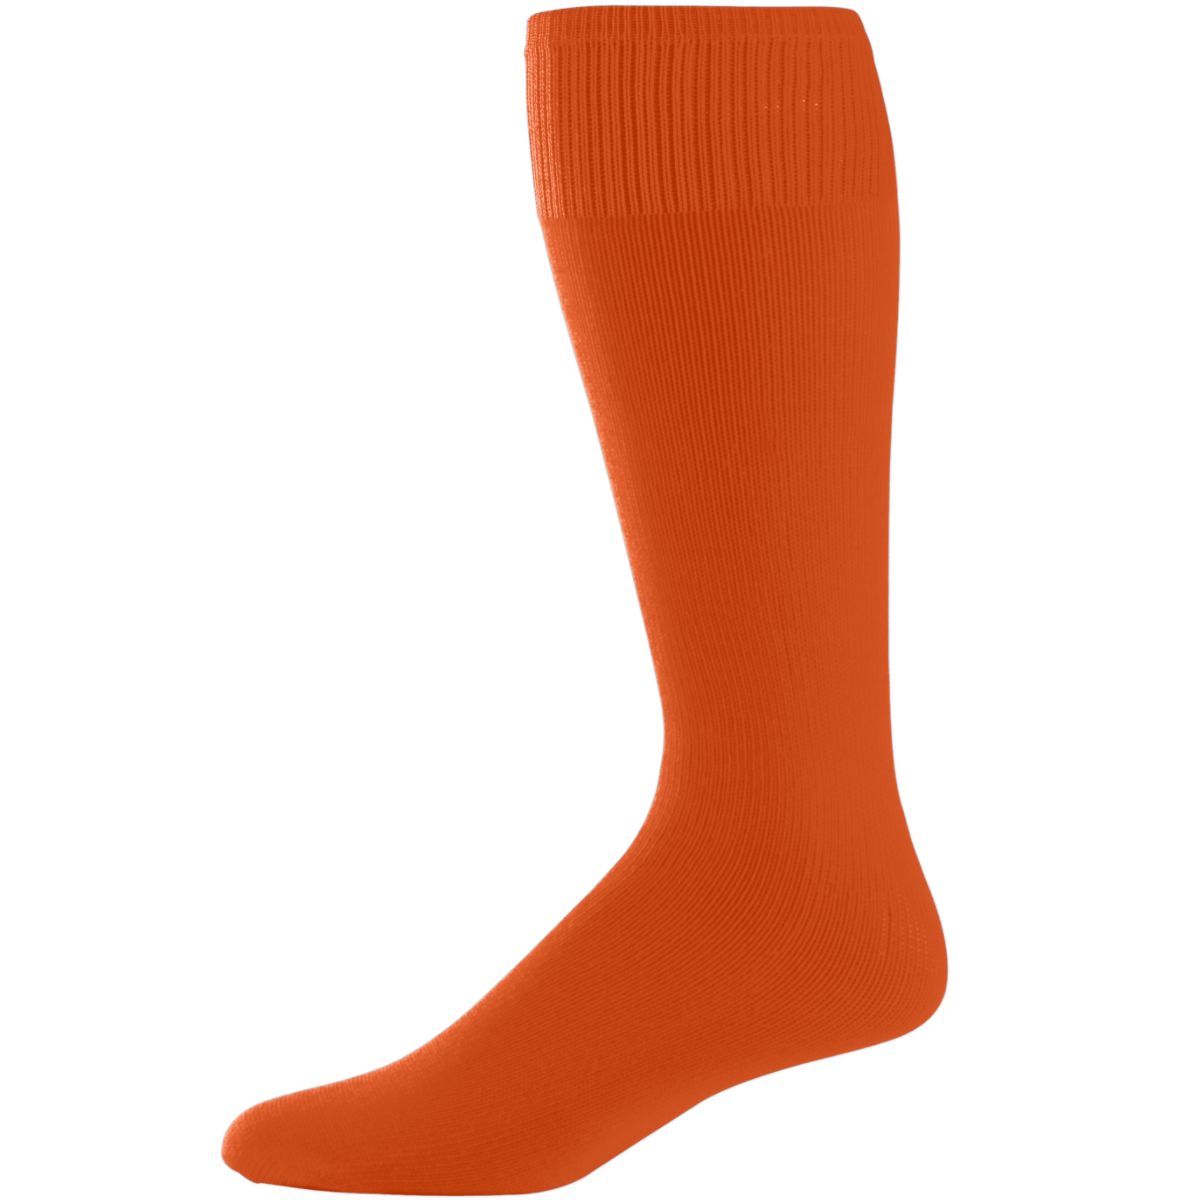 Augusta Sportswear Game Socks in Orange  -Part of the Accessories, Augusta-Products, Accessories-Socks product lines at KanaleyCreations.com